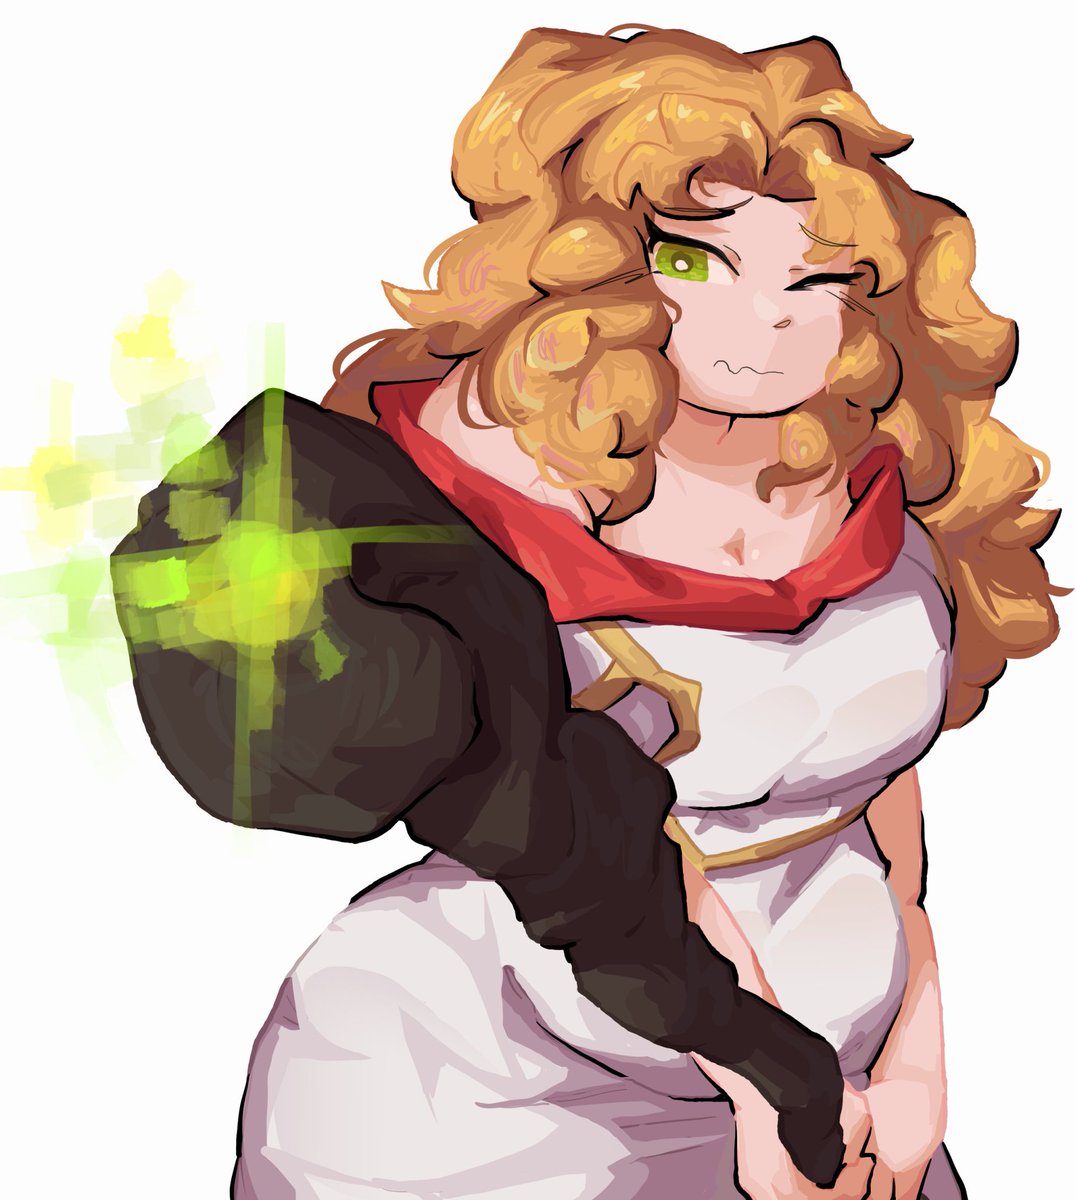 Nervous healer👩‍⚕️
Commission for @ roundabout_gal !